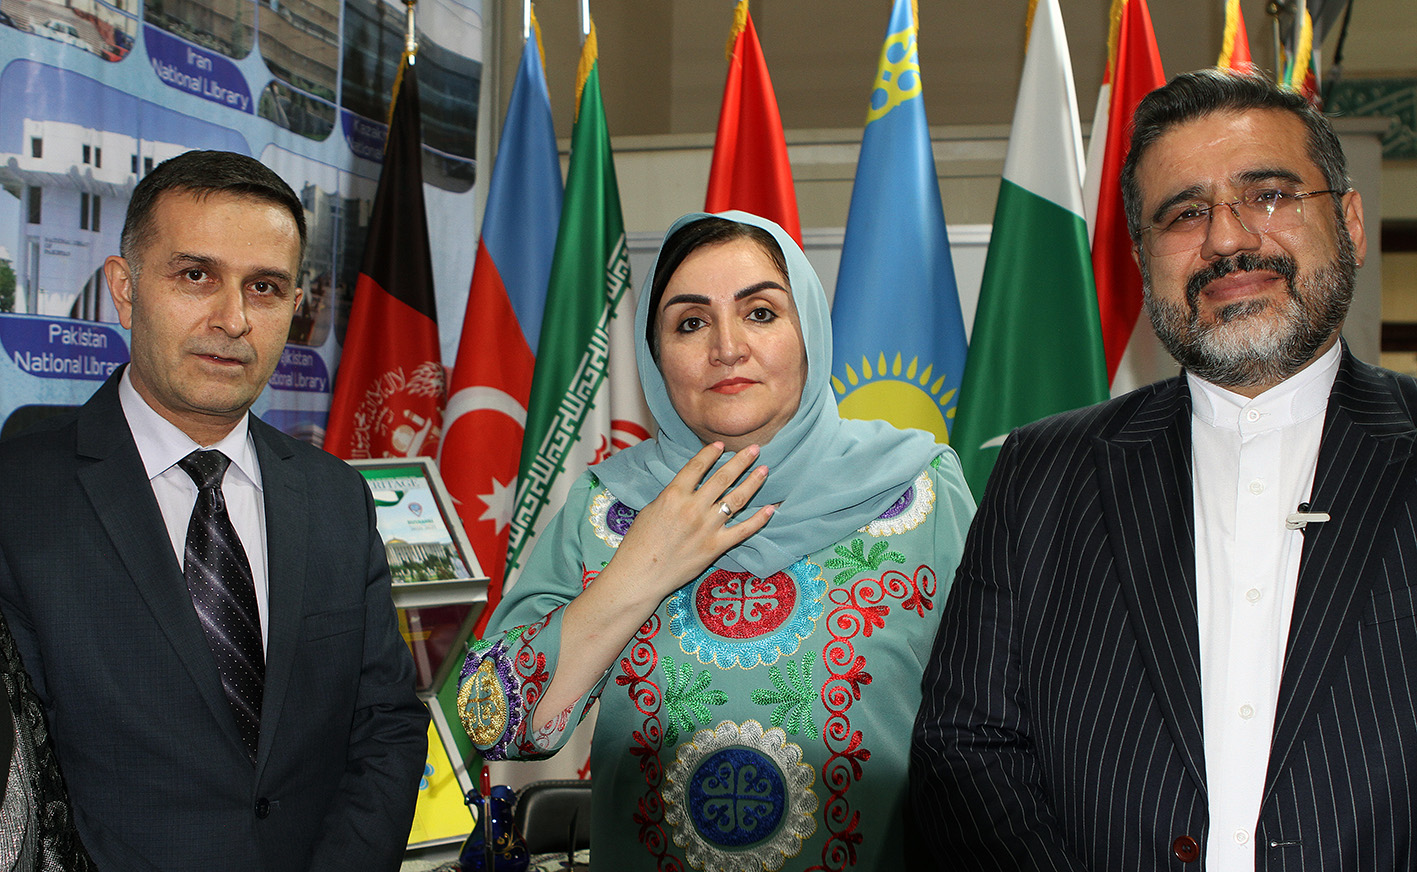 Ministers of Culture of Iran and Tajikistan visited the ECO Cultural Institute's publication stall